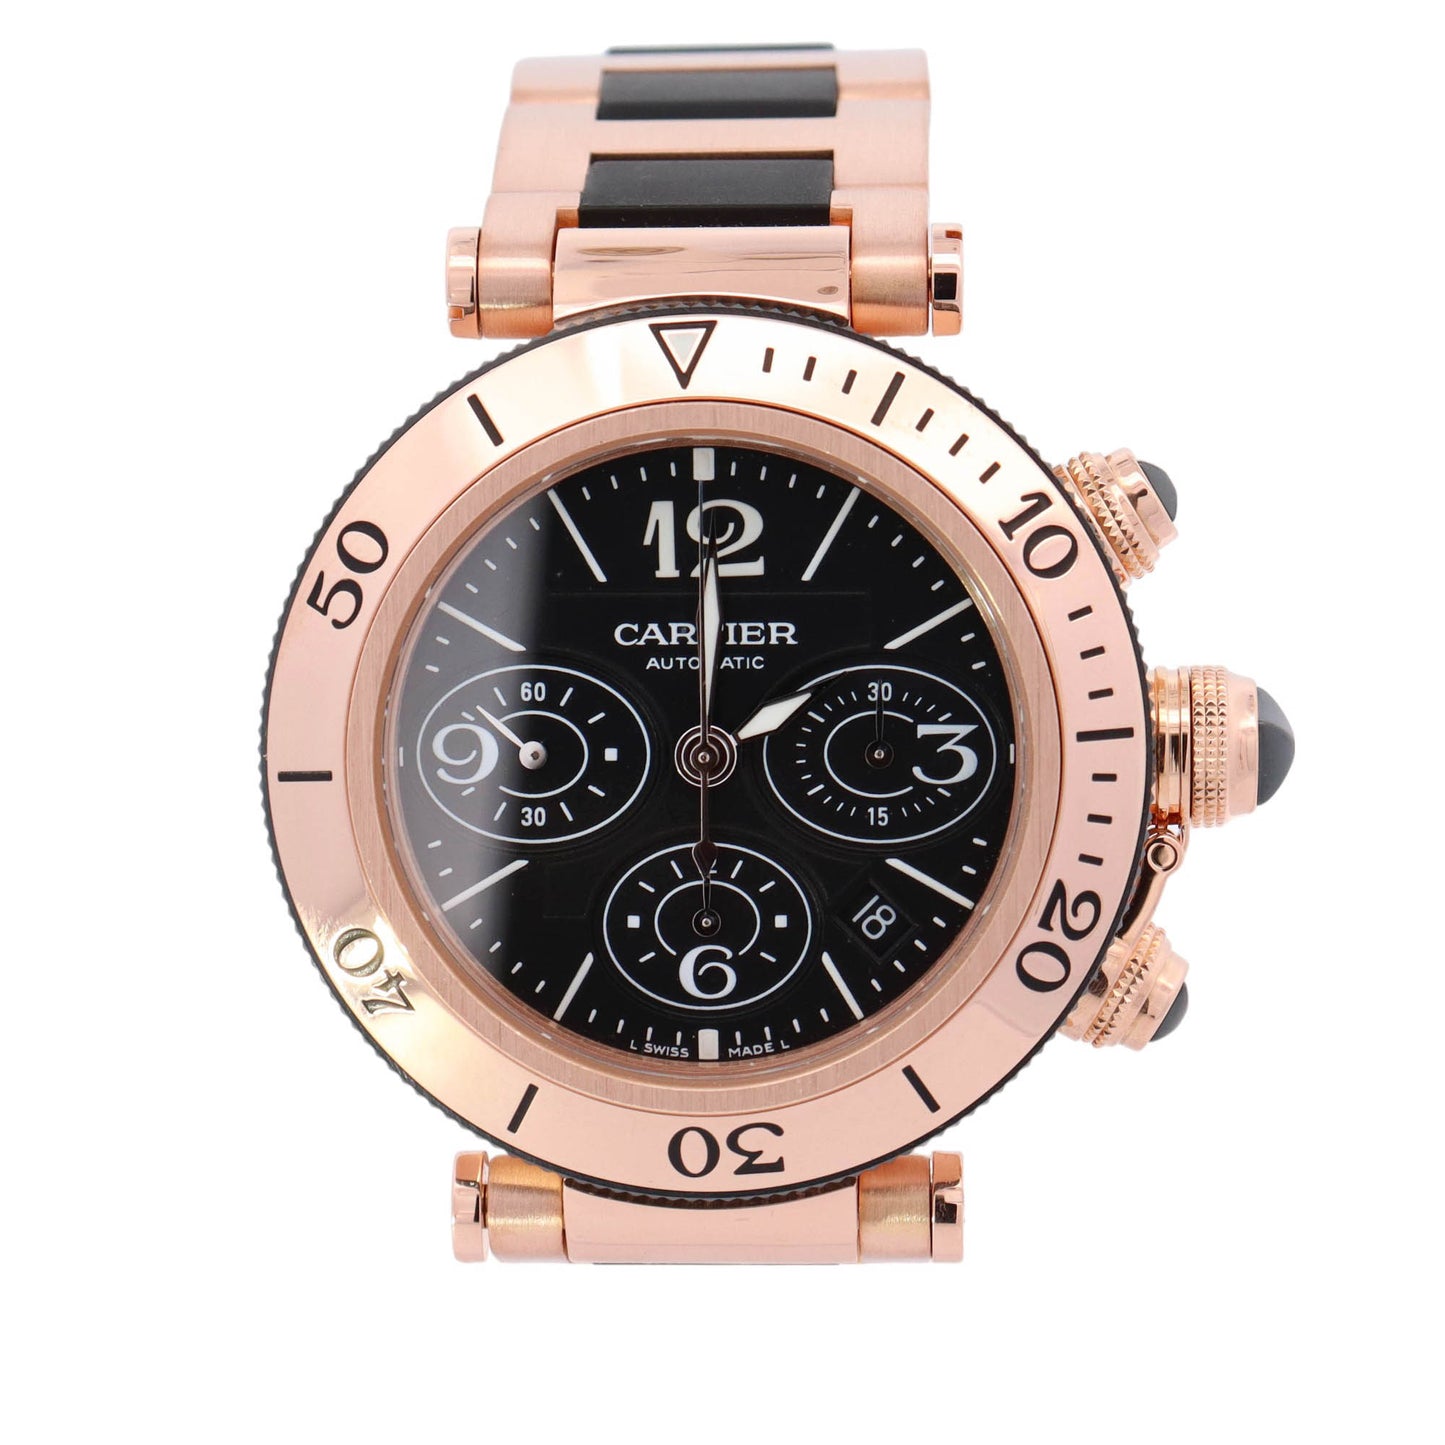 Cartier Pasha Seatimer Rose Gold 42.5mm Black Chronograph Dial Watch Reference# W301970M - Happy Jewelers Fine Jewelry Lifetime Warranty